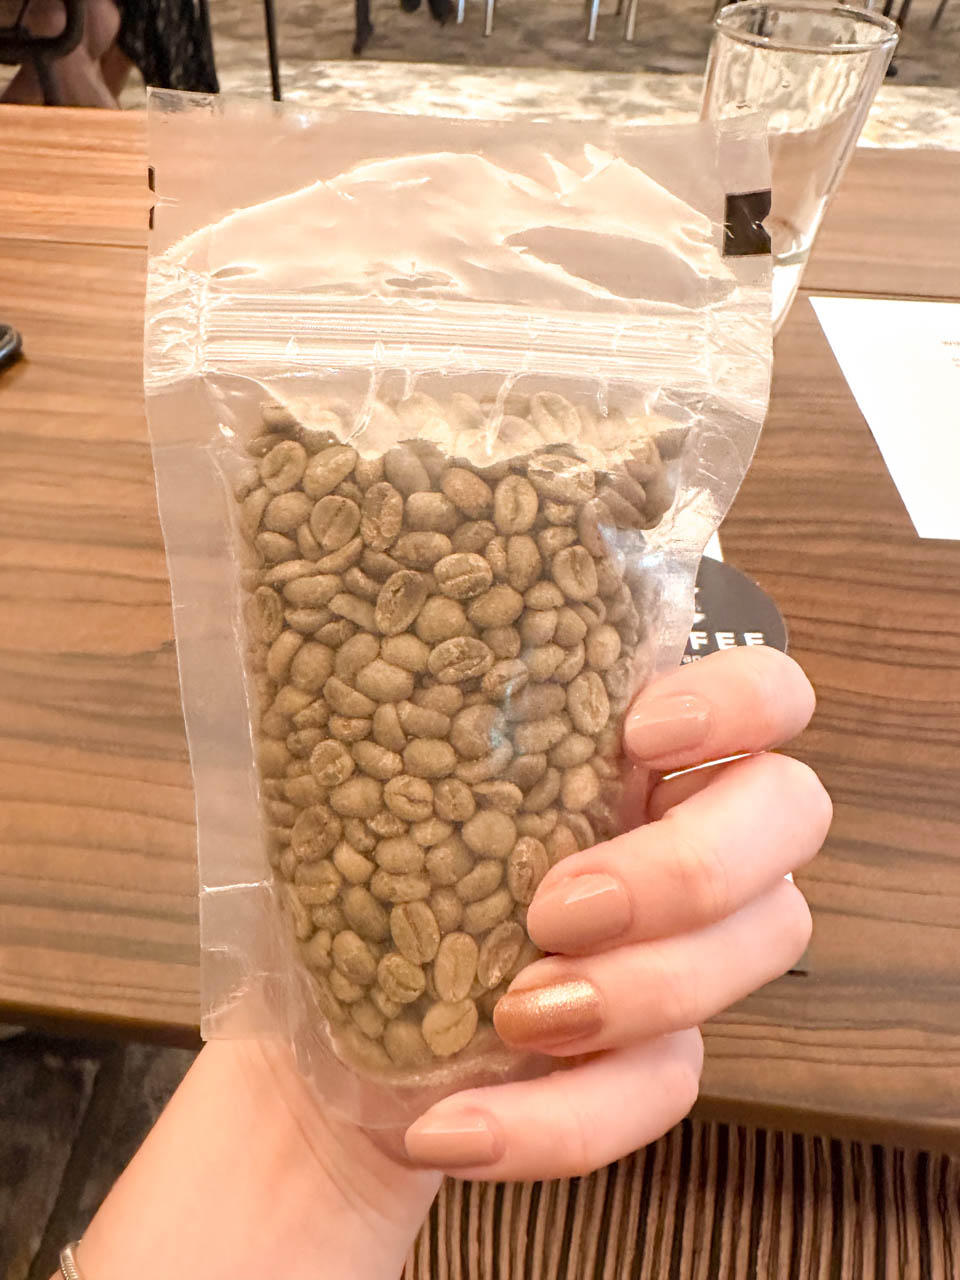 A woman's hand holding a bag of unroasted coffee beans